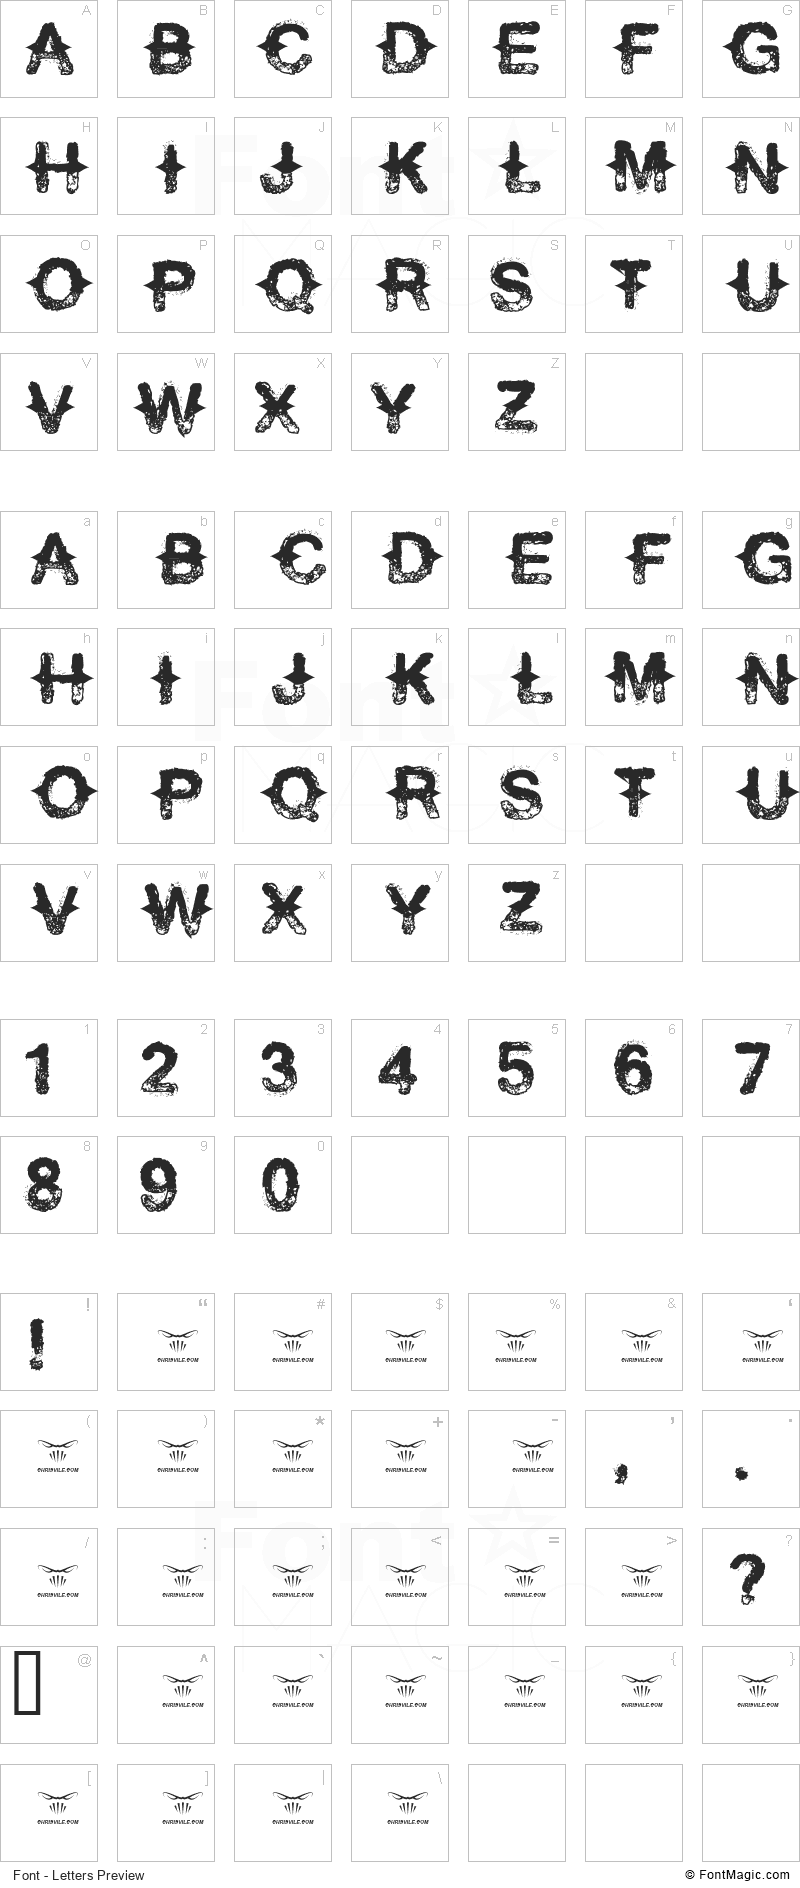 Never Speak Of Font - All Latters Preview Chart